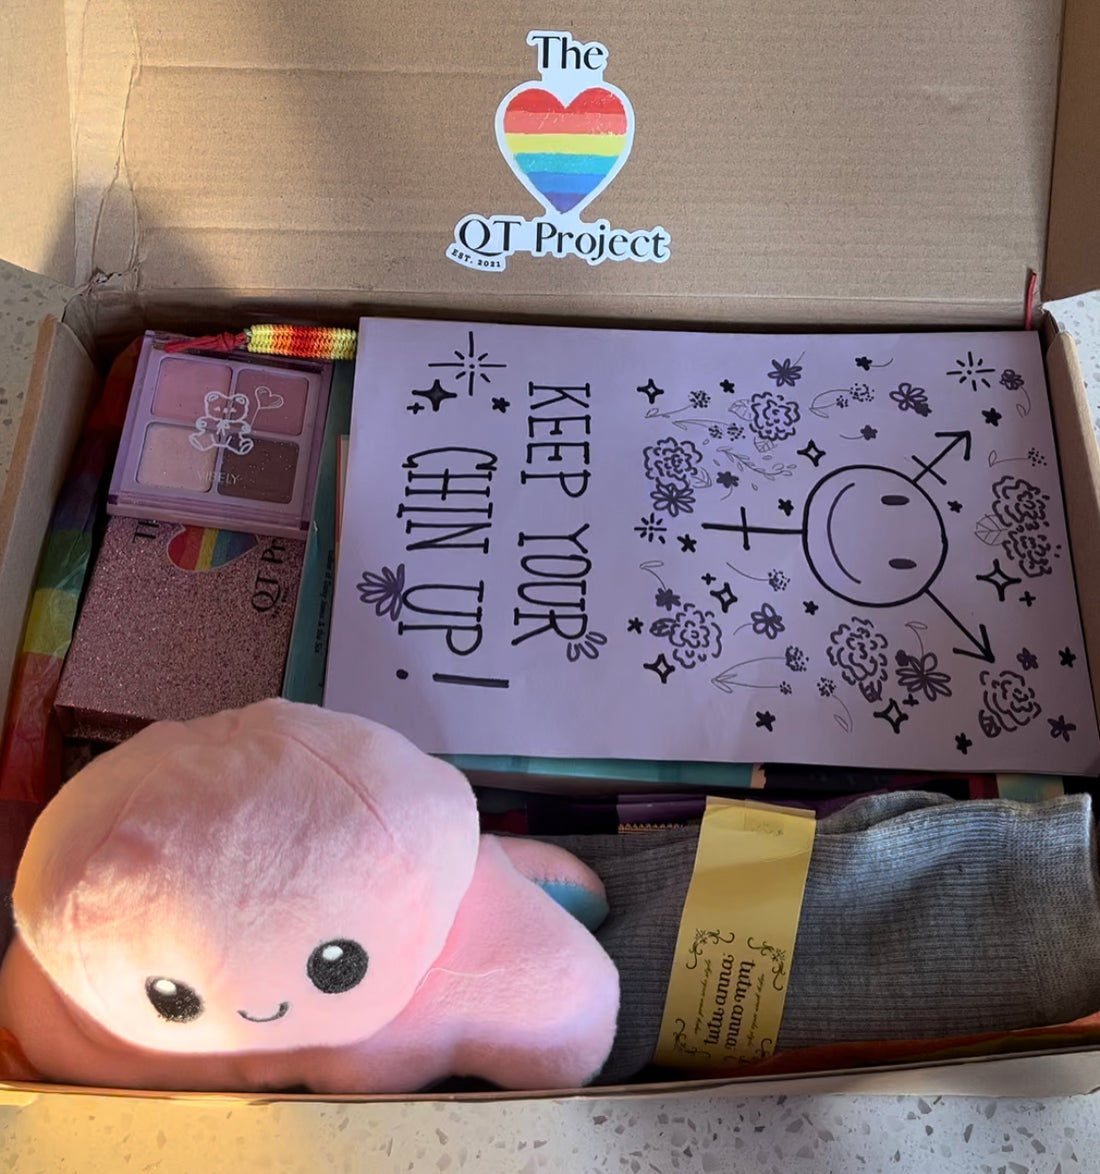 Sample Build-A-Queer kit with visible items shown of a reversible plushie octopus, a handwritten card, socks, the Queer Trans Project Sticker, and more in a brown box